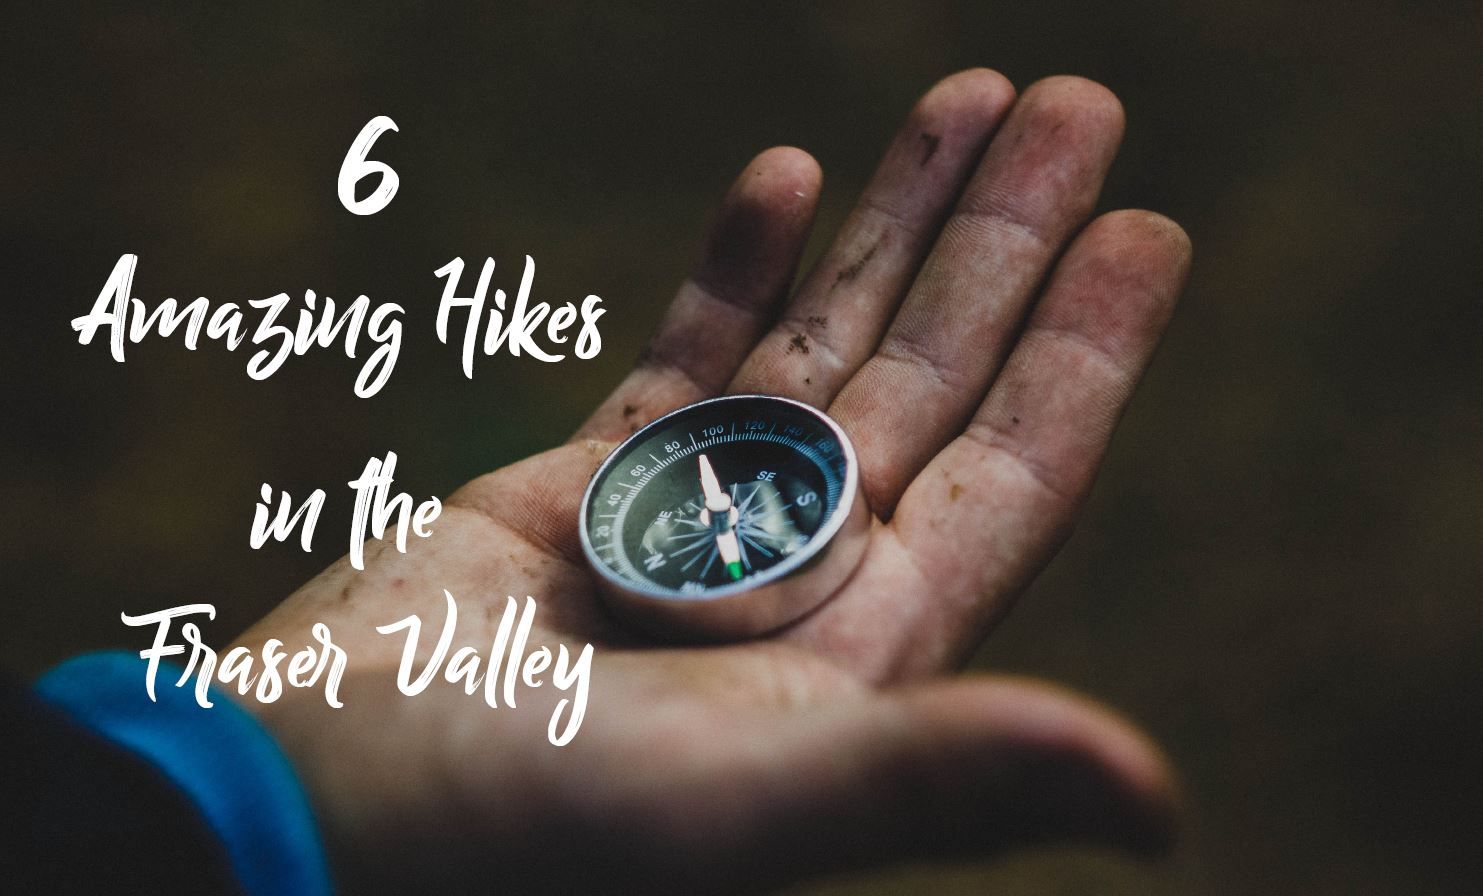 6 Amazing Hikes in the Fraser Valley